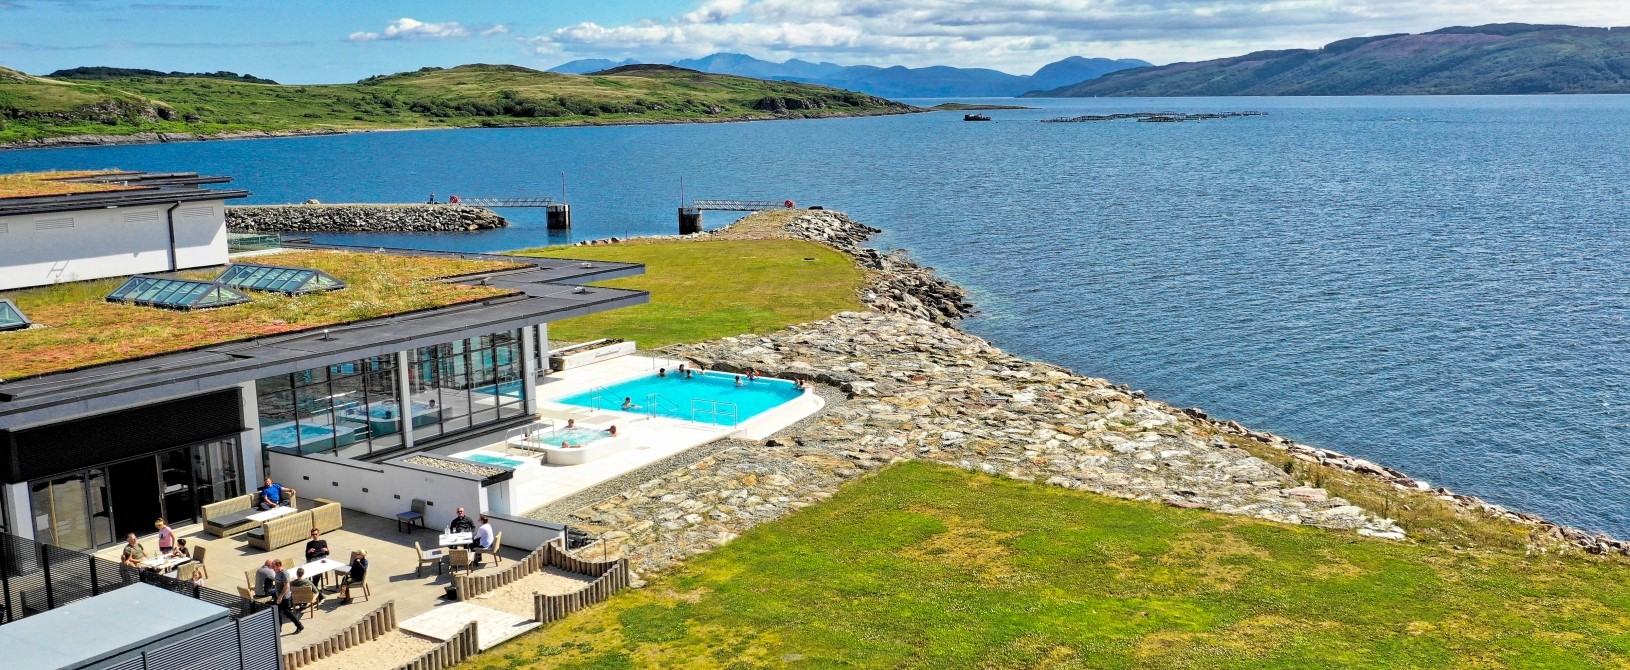 A small bay due west of Glasgow by the name of Portavadie with a superb spa and leisure centre